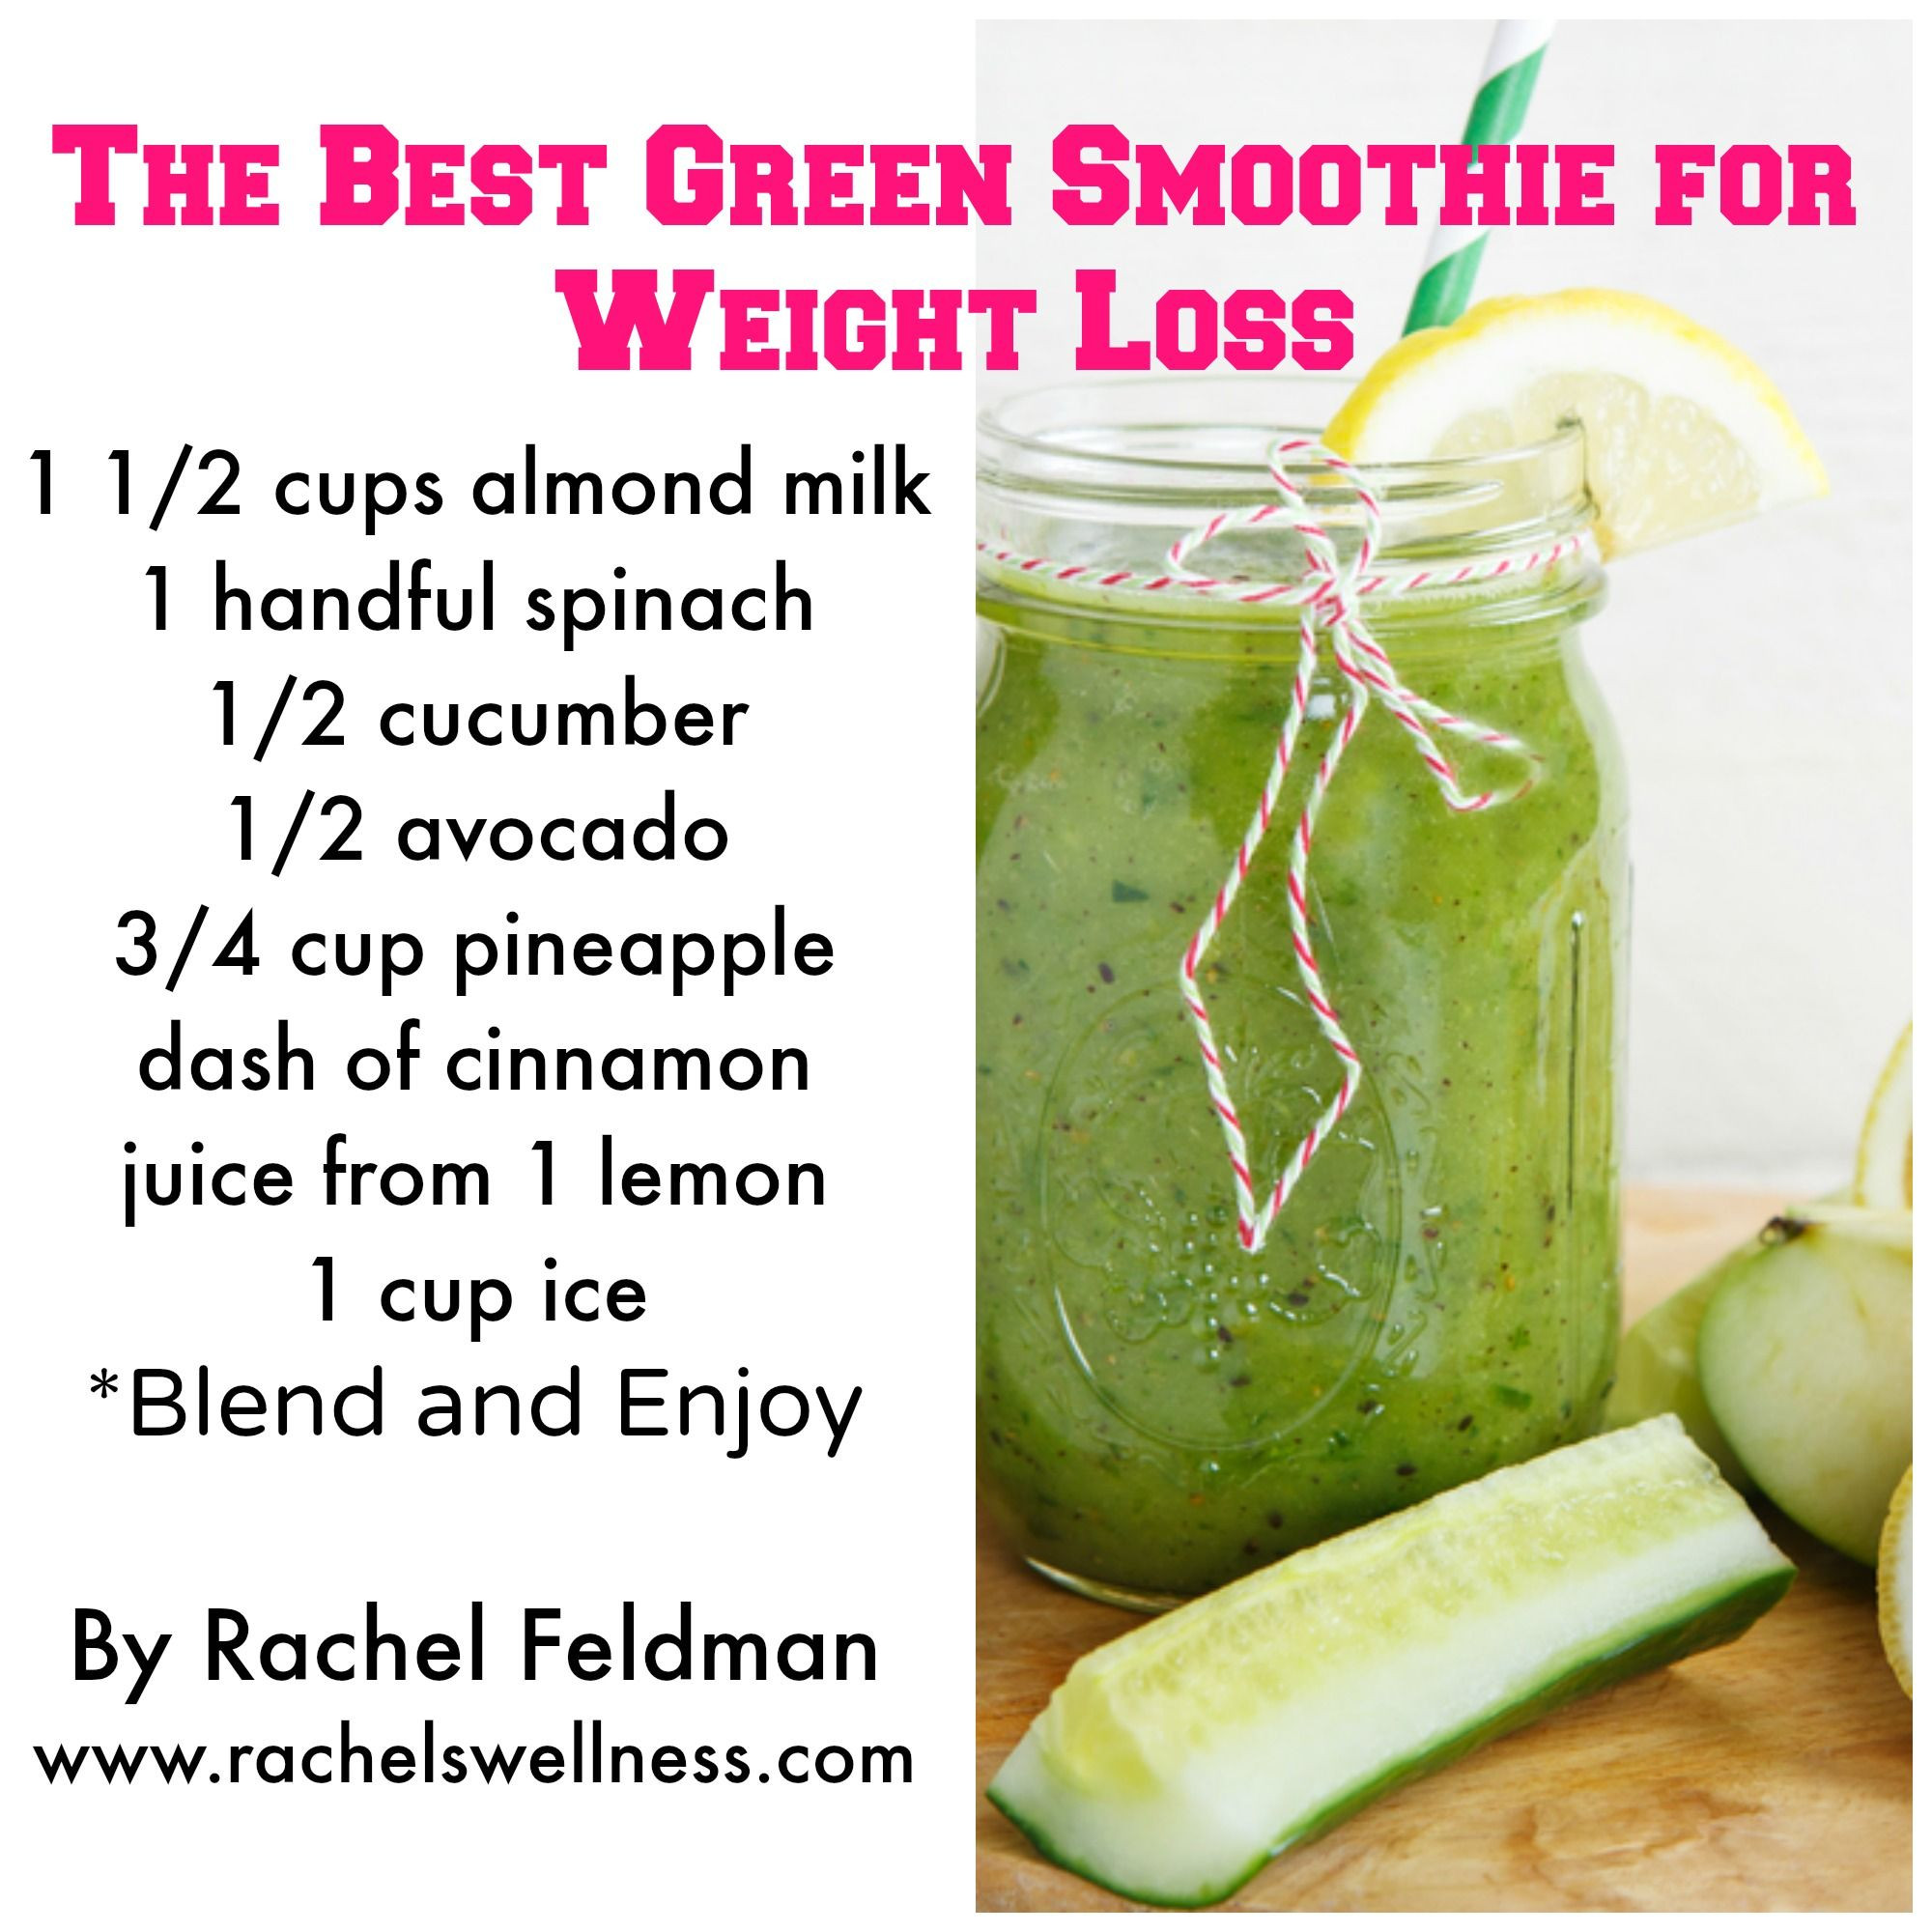 Green Smoothie Recipes Weight Loss
 7 Healthy Green Smoothie Recipes For Weight Loss